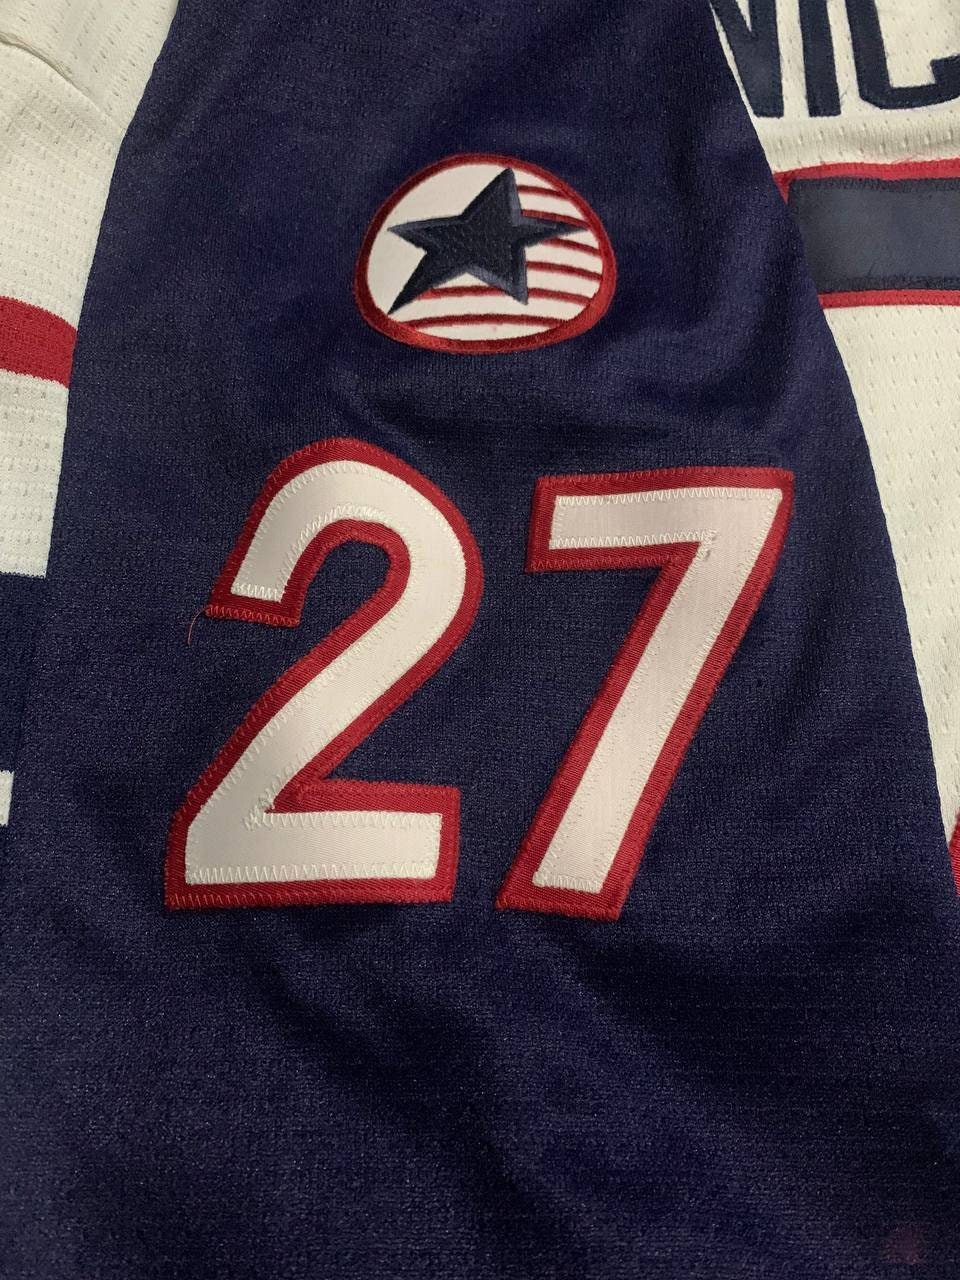 Vintage Nike Usa Ice Hockey Team roenick Player Issue Jersey 